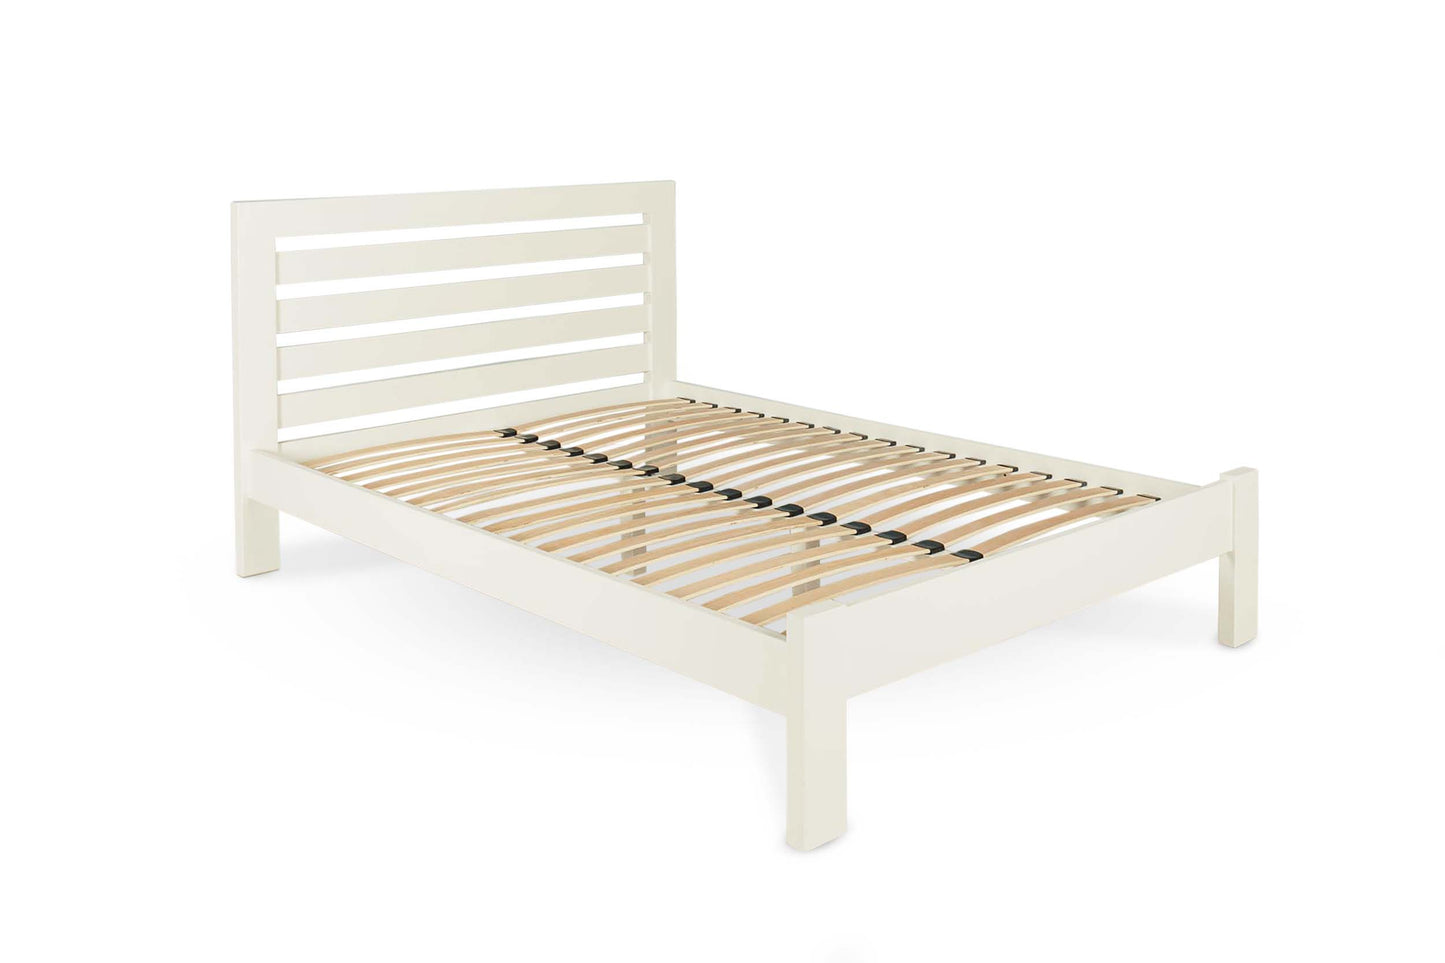 Wingfield Bed Frame - 4ft6 Double - Soft White